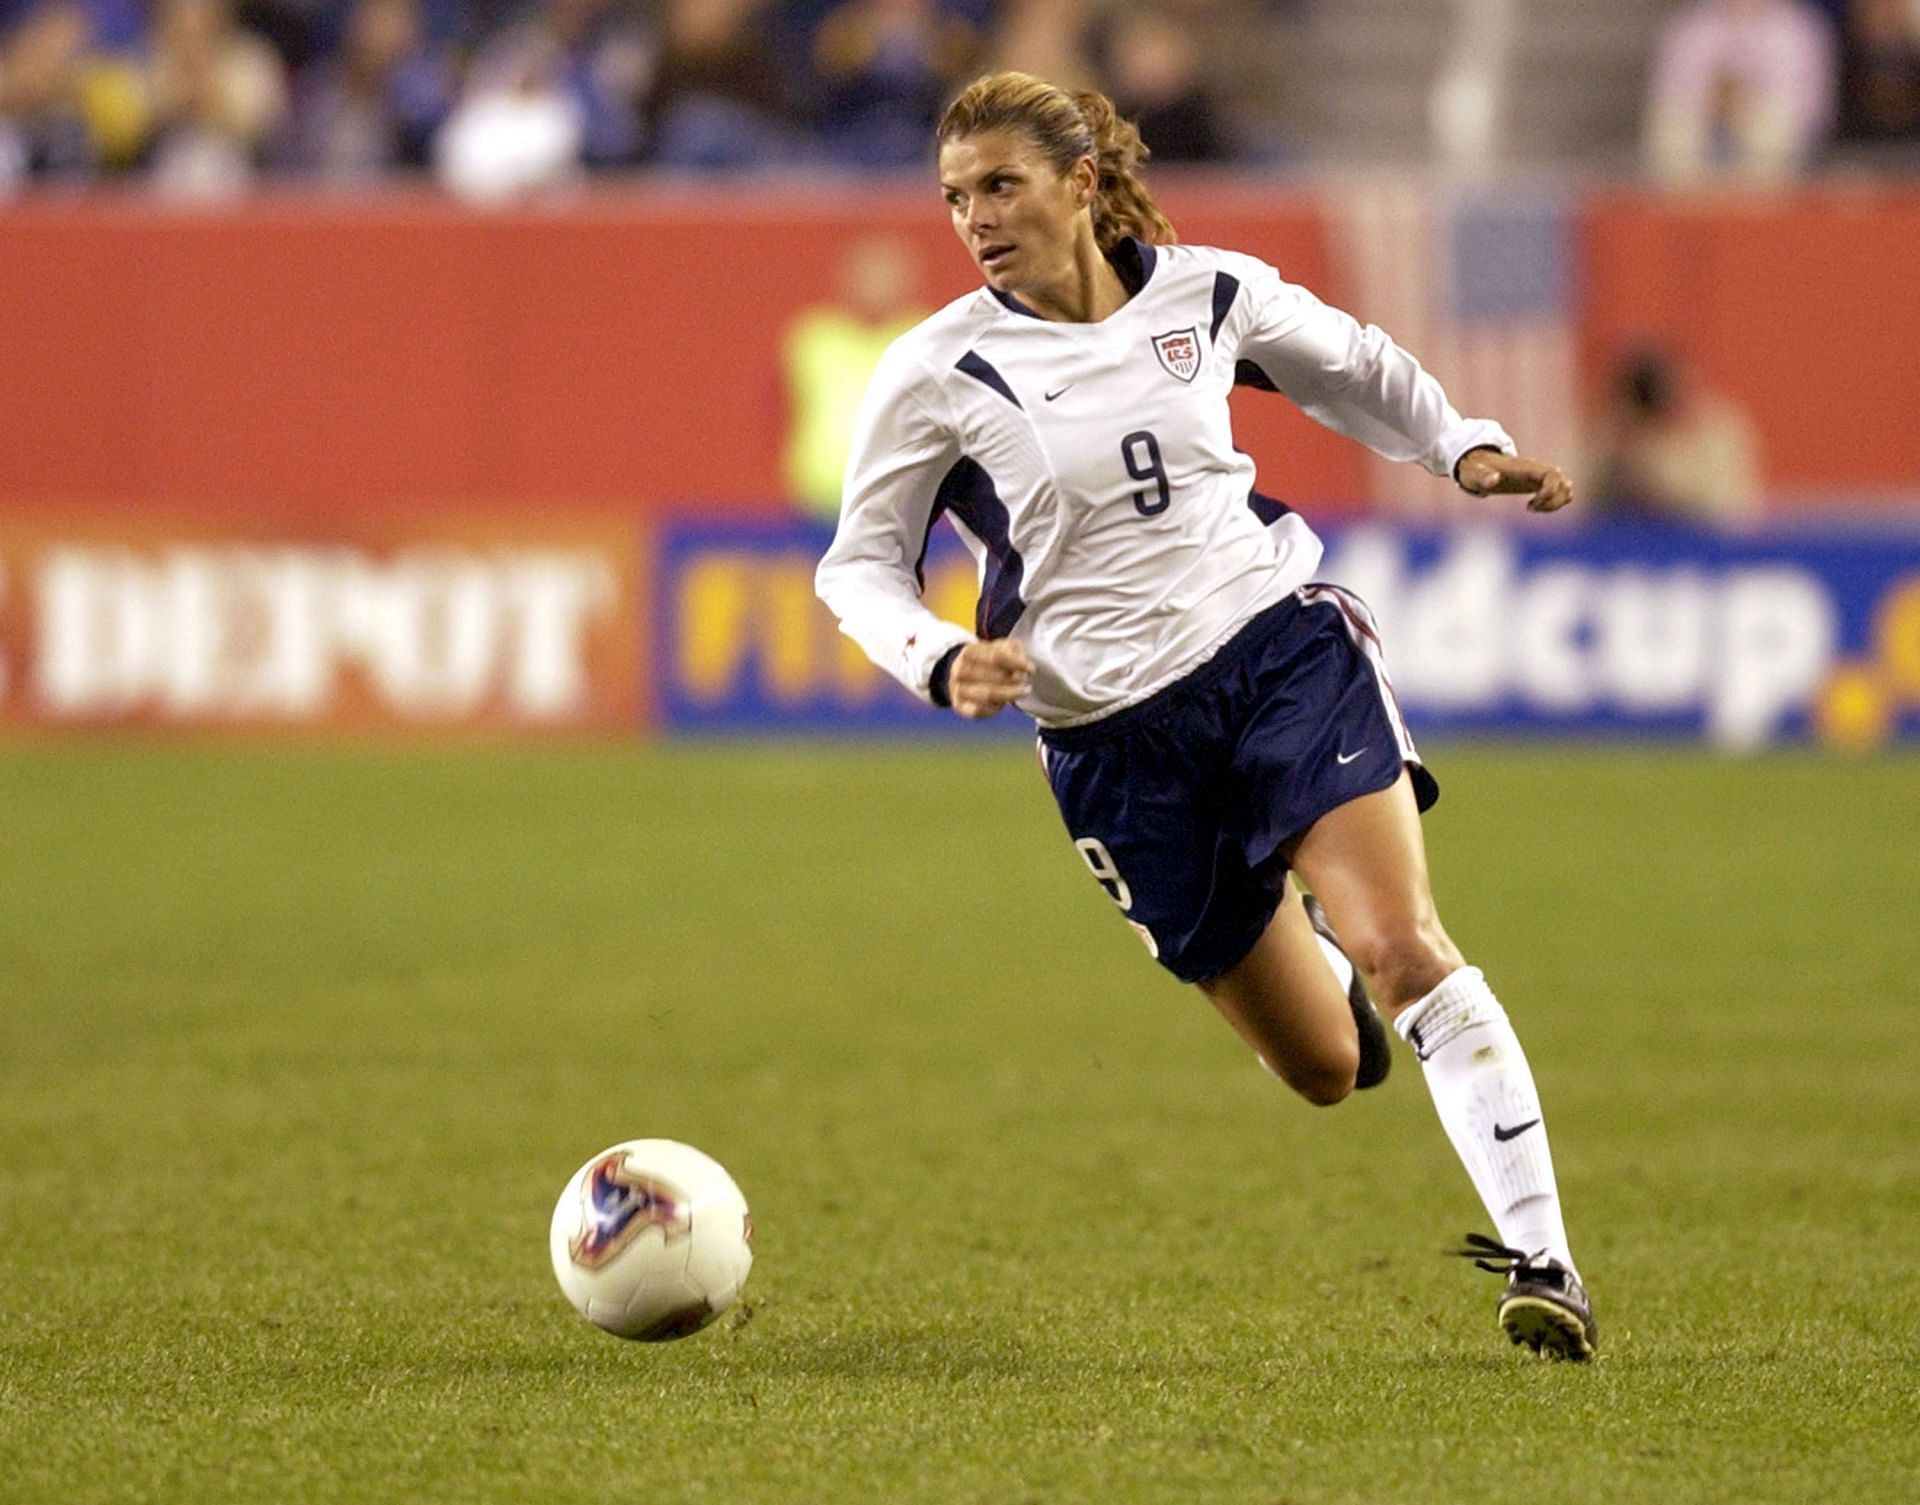 Mia Hamm in action vs Norway at the FIFA World Cup